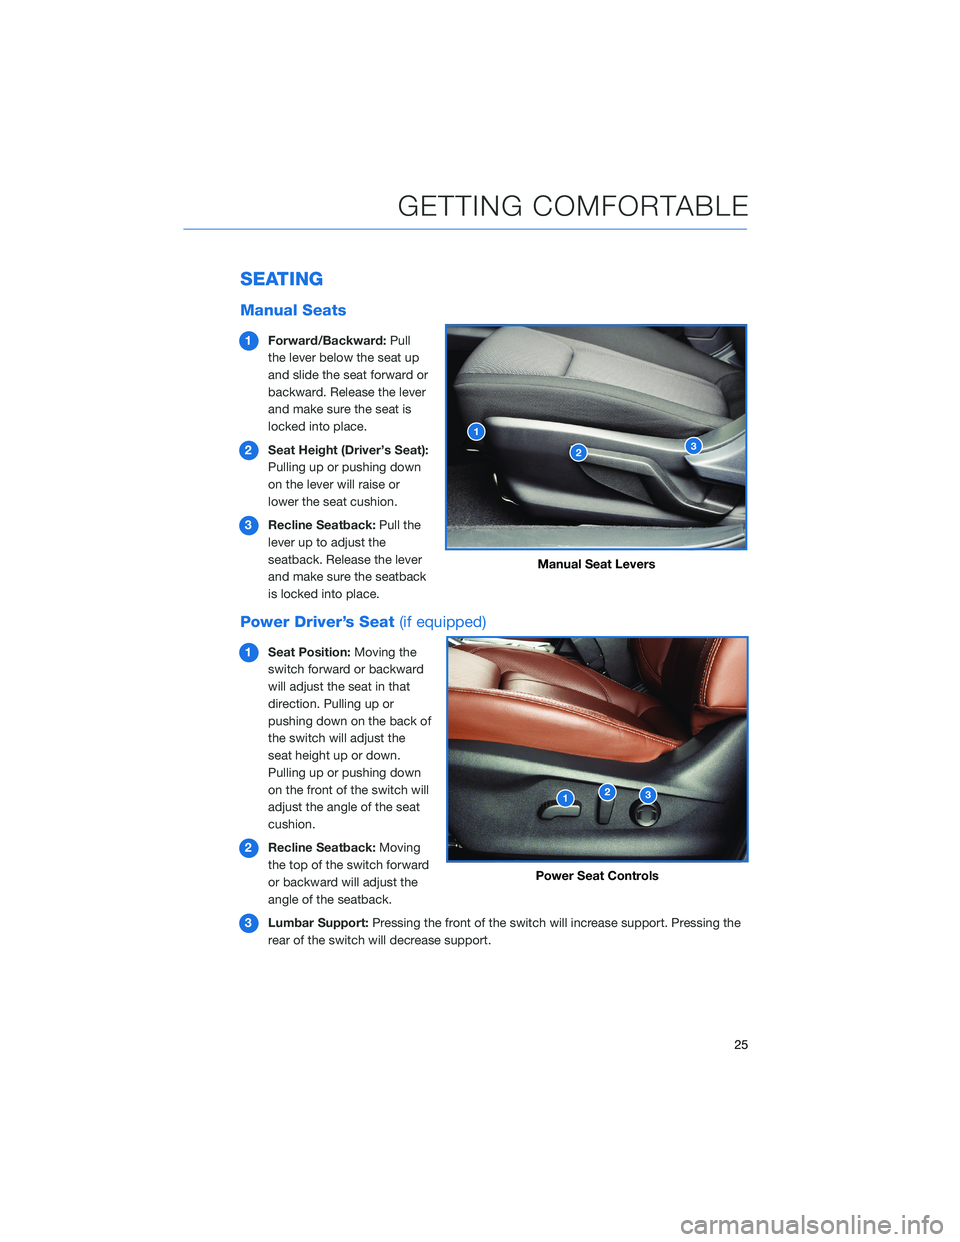 SUBARU FORESTER 2022  Getting Started Guide SEATING
Manual Seats
1Forward/Backward: Pull
the lever below the seat up
and slide the seat forward or
backward. Release the lever
and make sure the seat is
locked into place.
2 Seat Height (Driver’